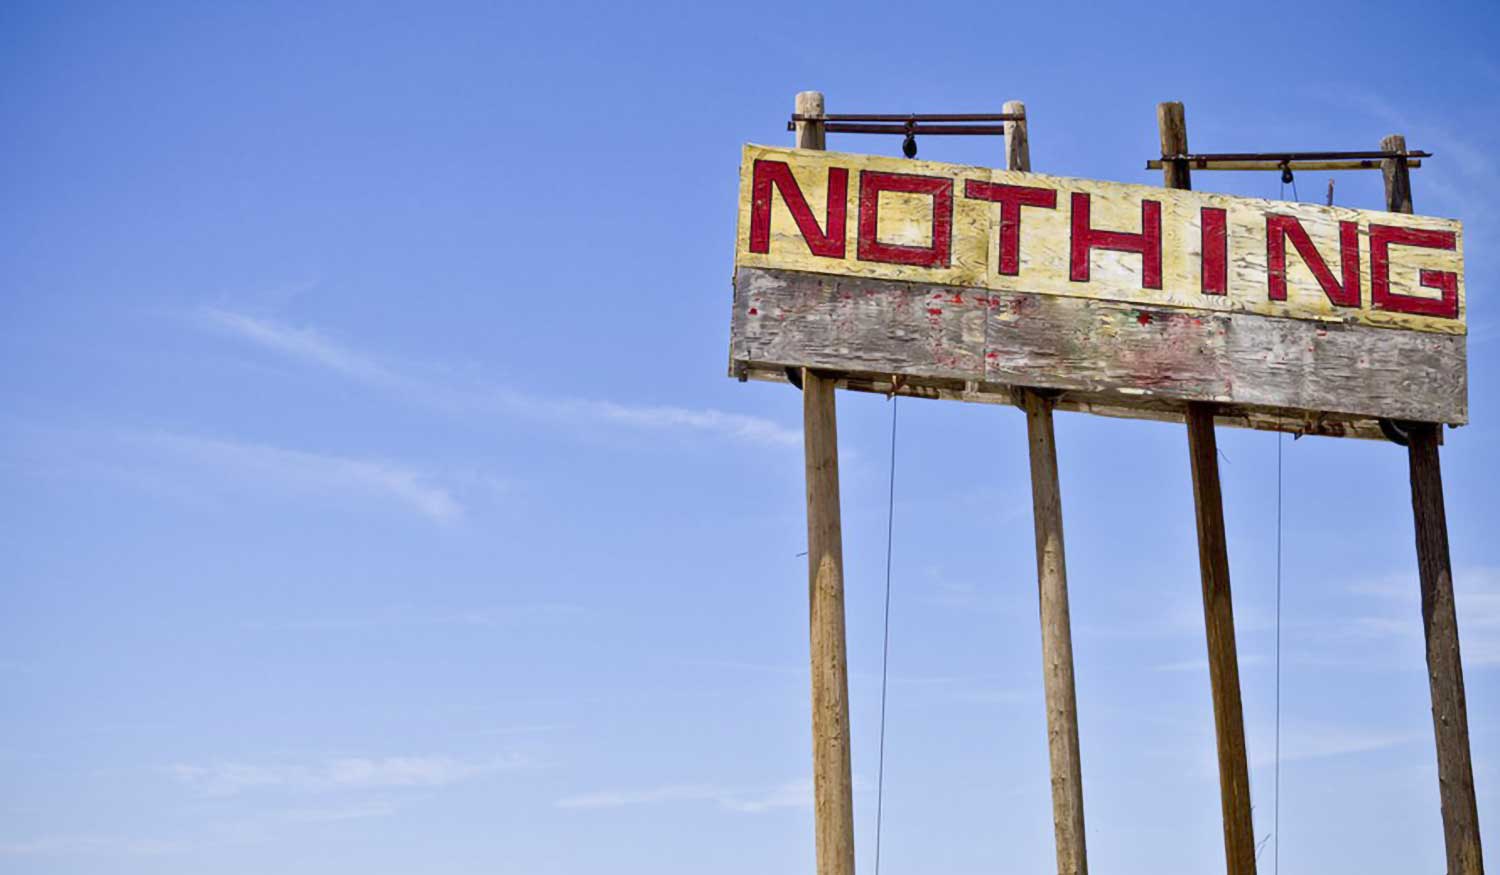 A billboard reading "Nothing". We seem to connote the word "nothing" as a negative, but many a Bible story has been told about something coming from nothing, or famous biblical heroes turning impossible odds into "nothing". Read why sometimes "nothing" can be "everything".